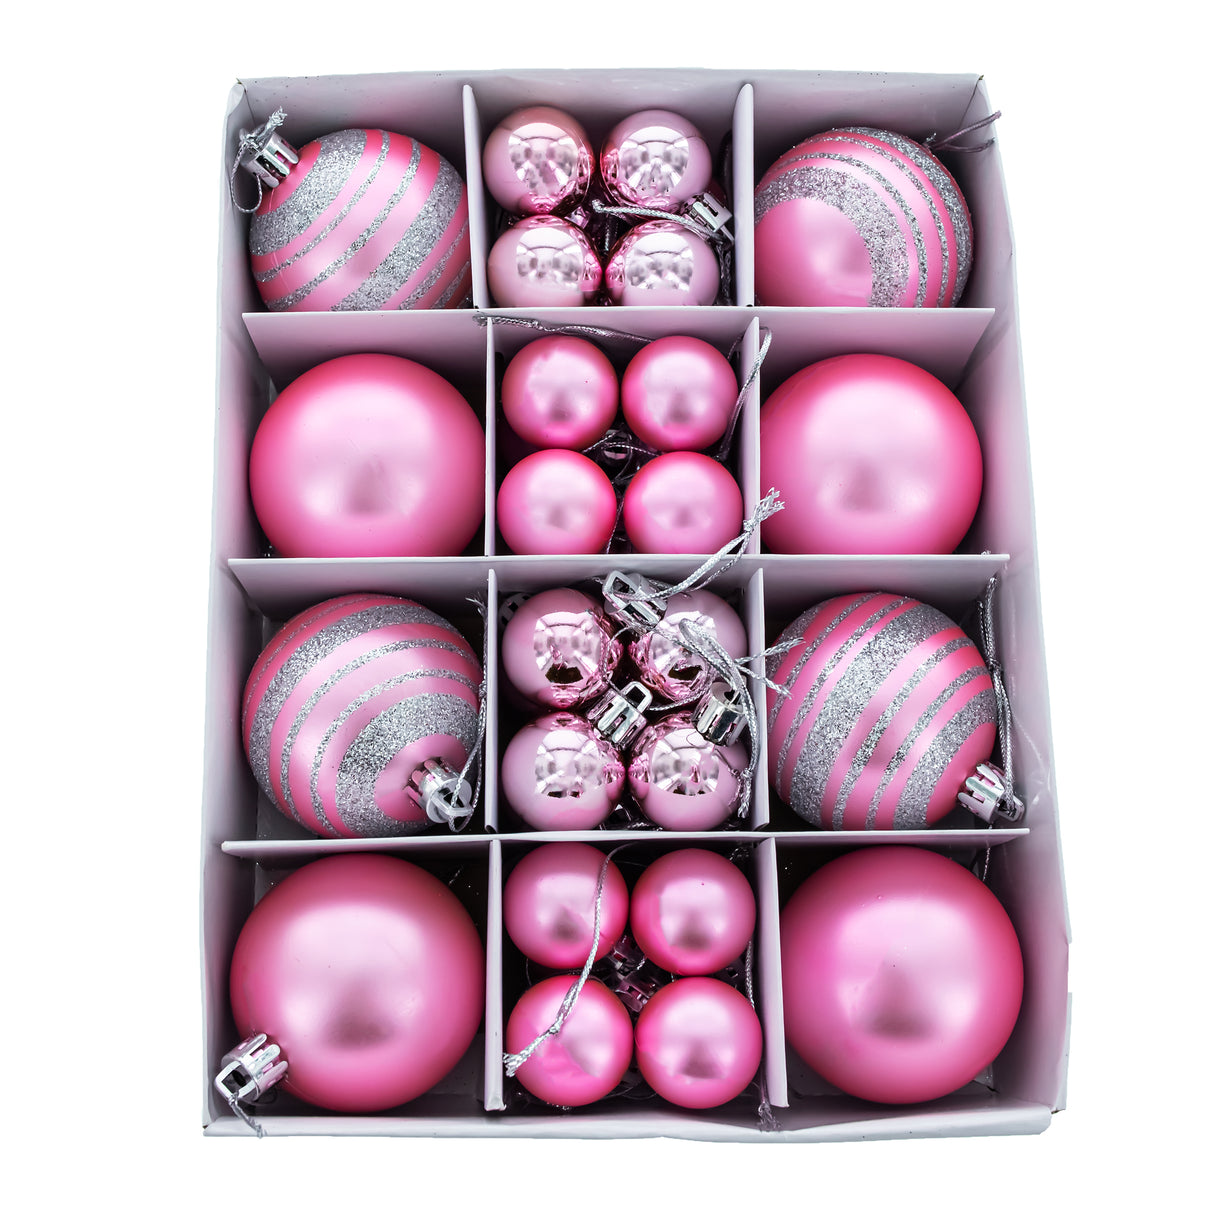 Elegant Set of 40-Piece Pink Ball Christmas Ornaments in Pink color, Round shape